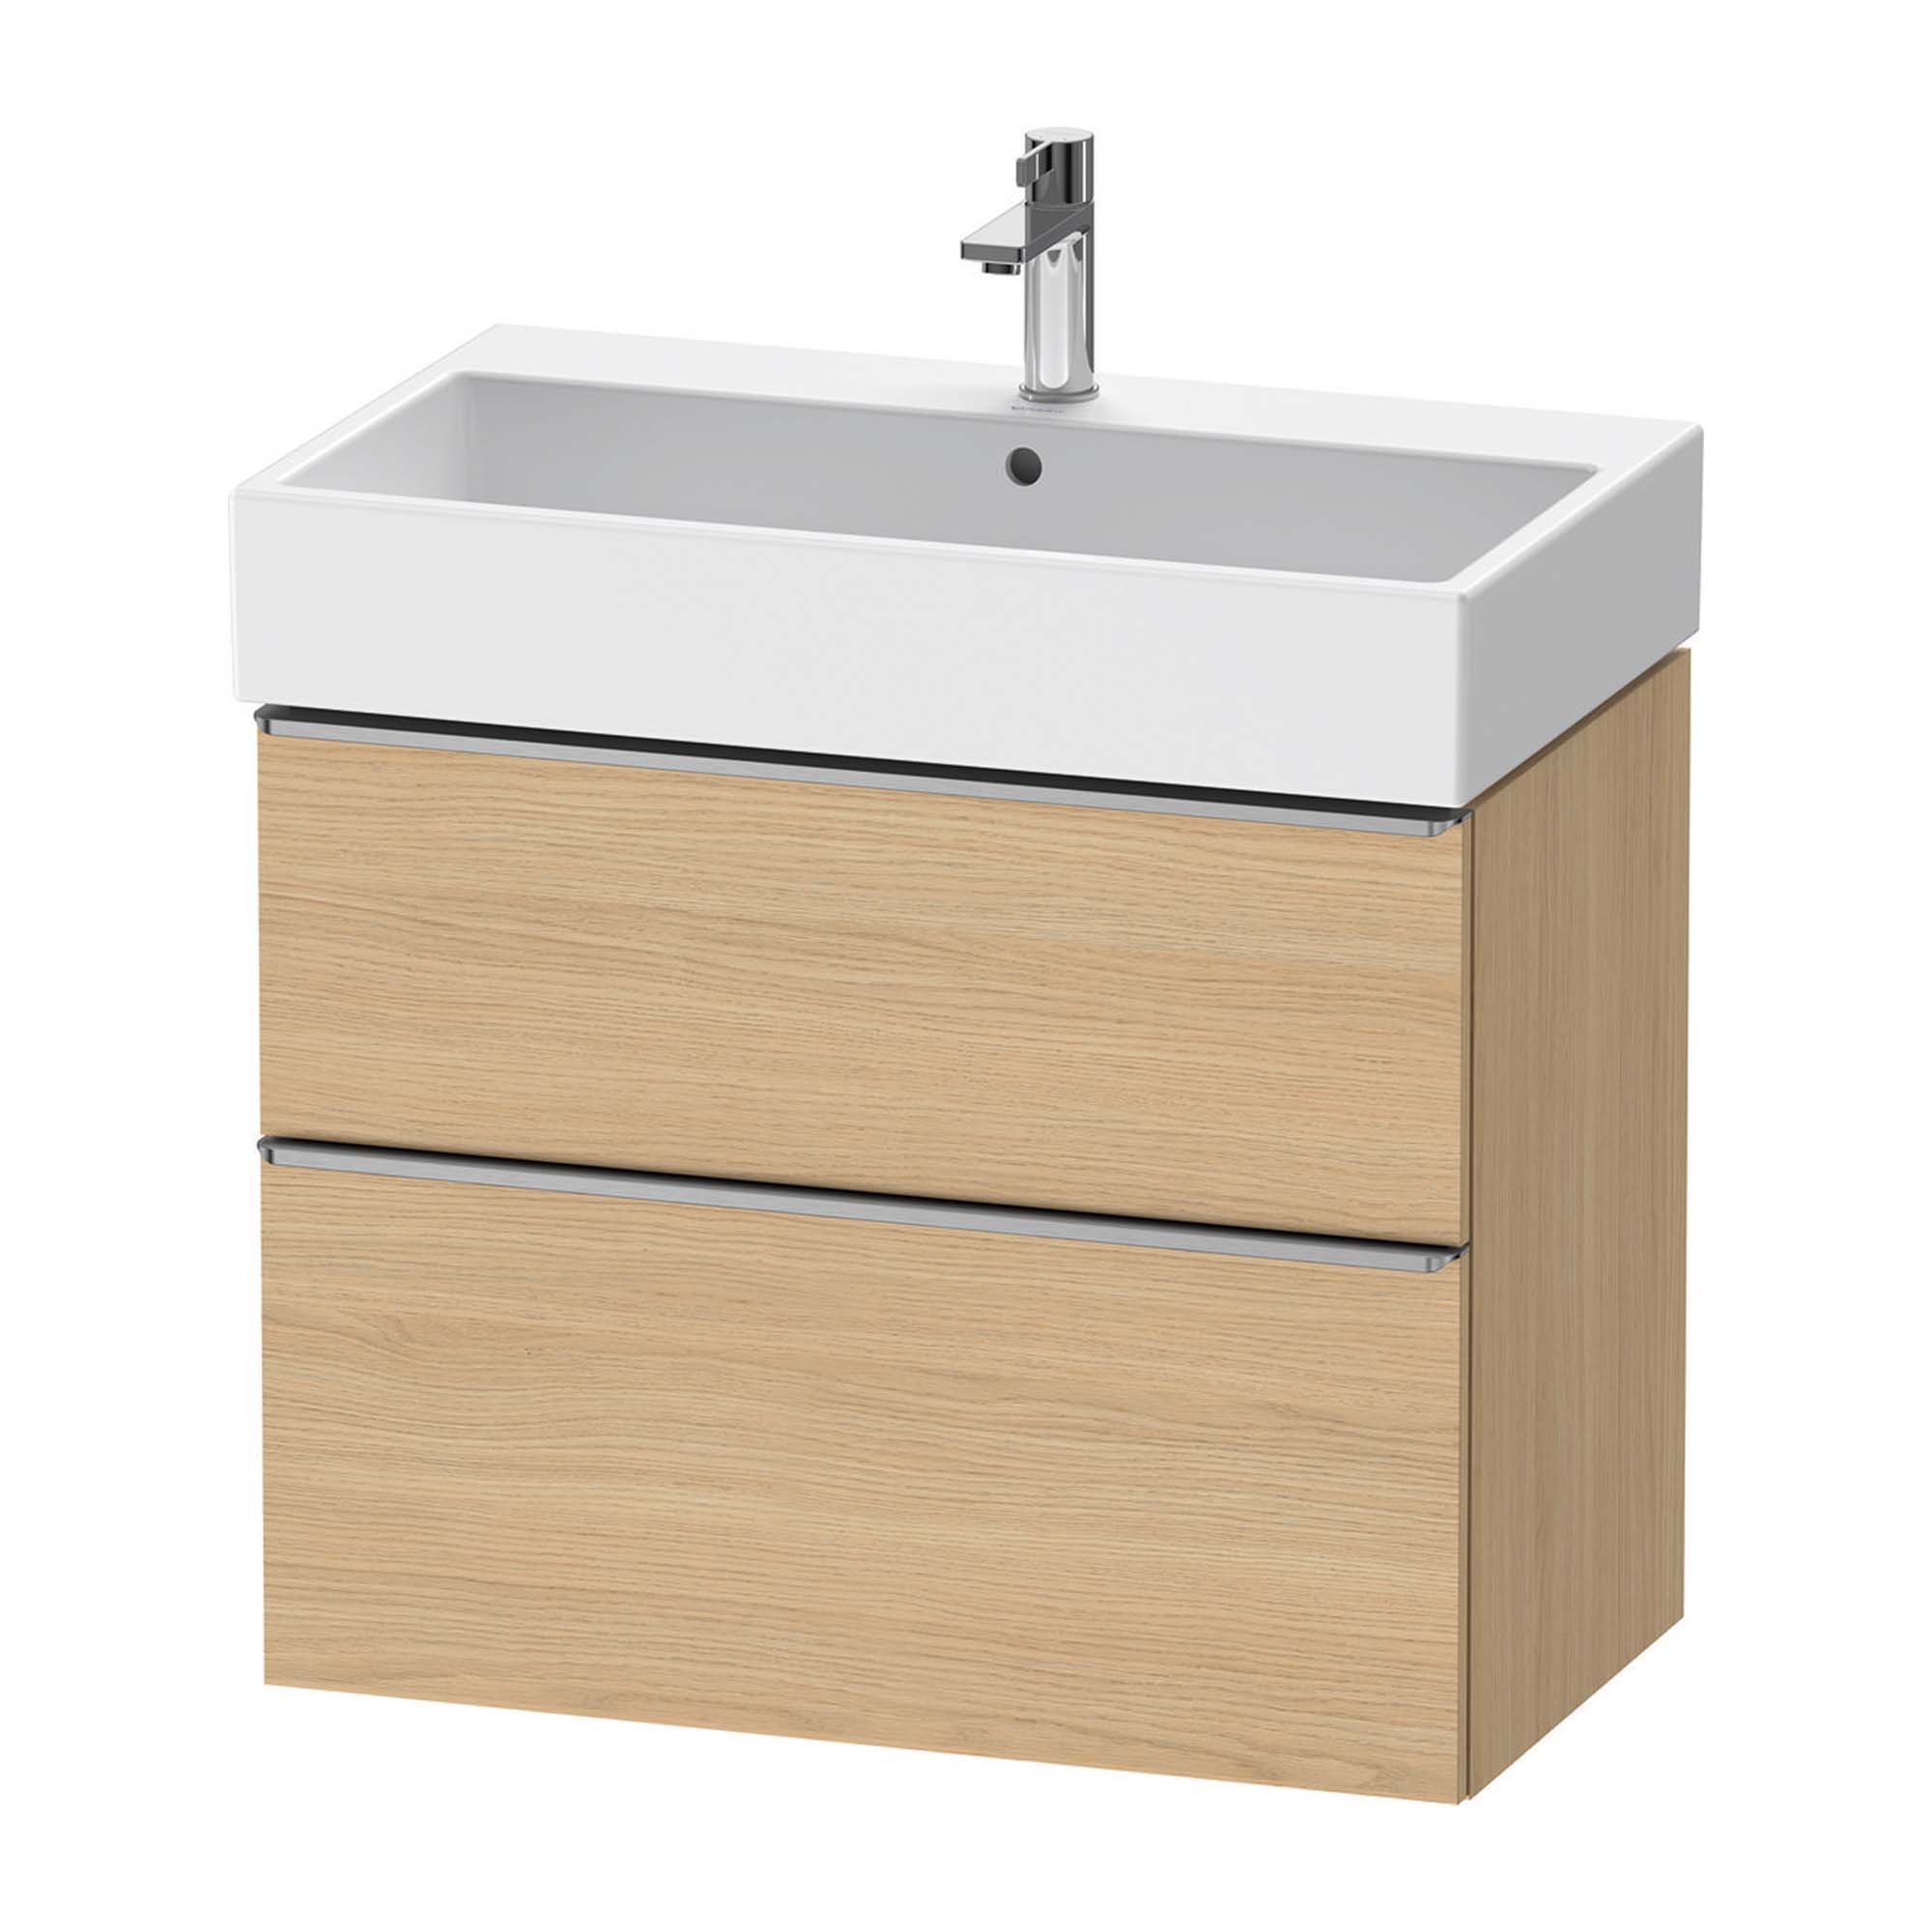 duravit d-neo 800 wall mounted vanity unit with vero basin natural oak stainless steel handles